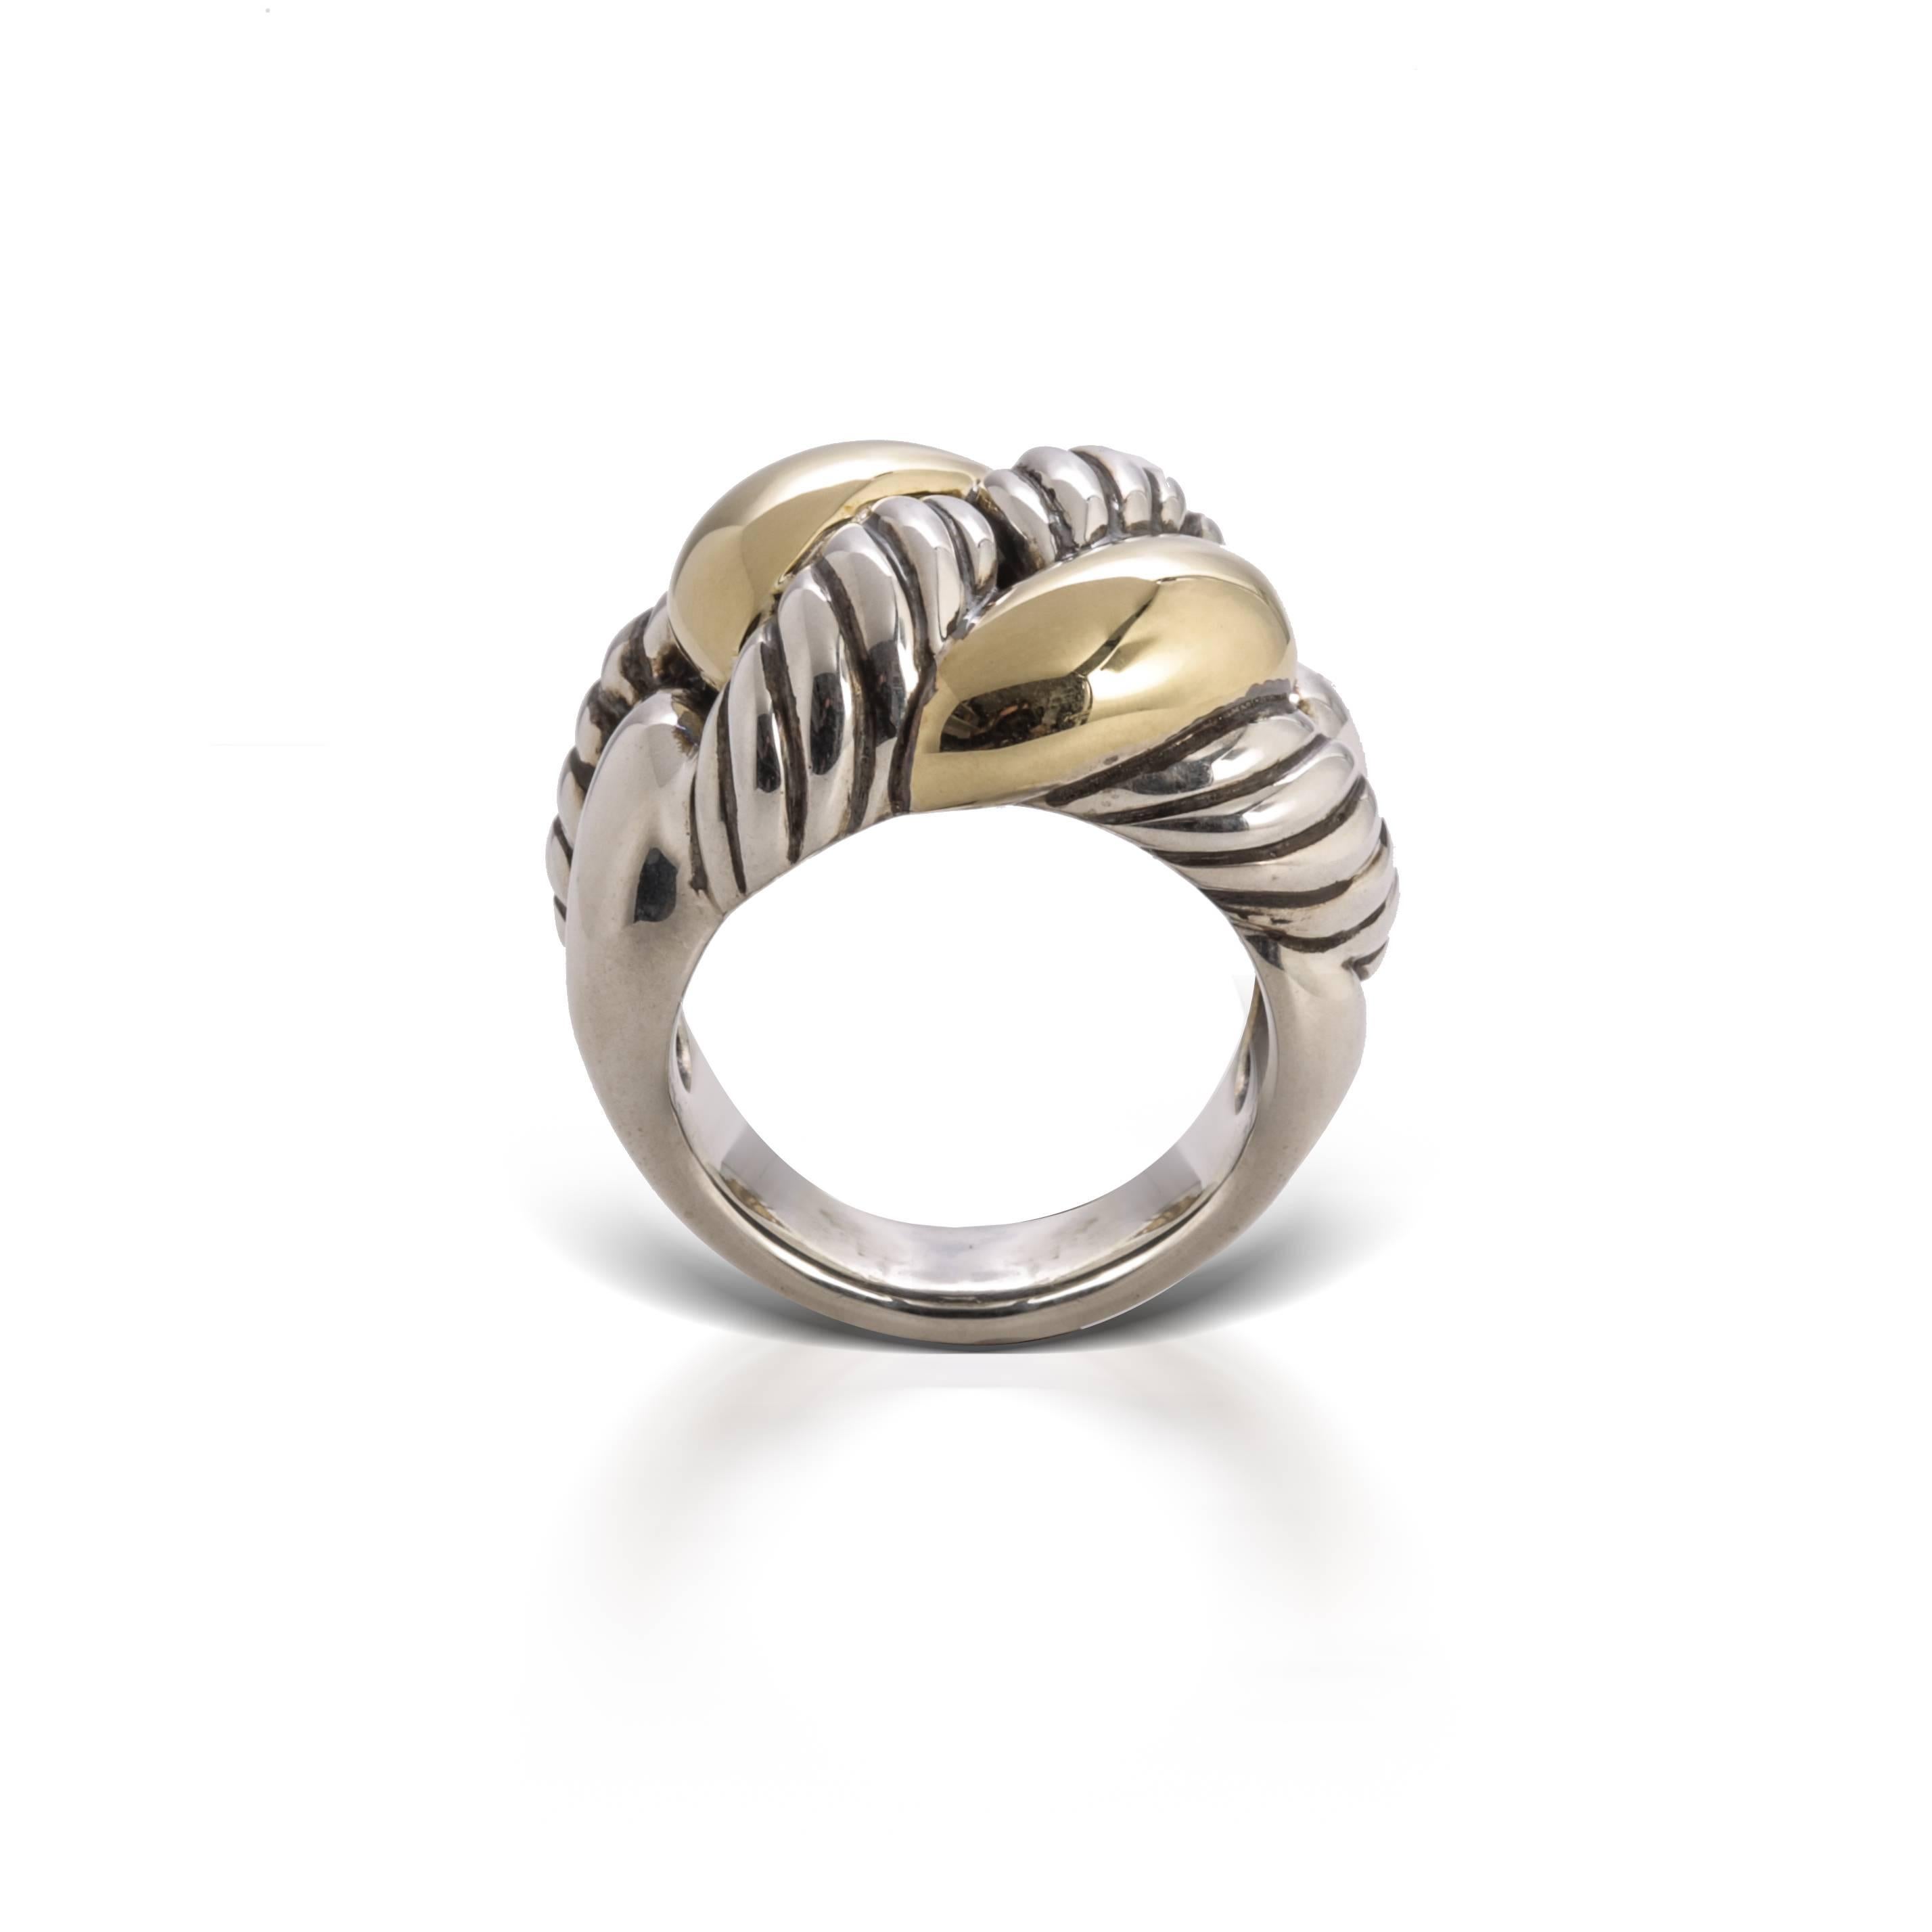 Sterling silver and 18 karat yellow gold David Yurman Belmont Curb Link ring featuring high polish finish throughout (size 6.75).